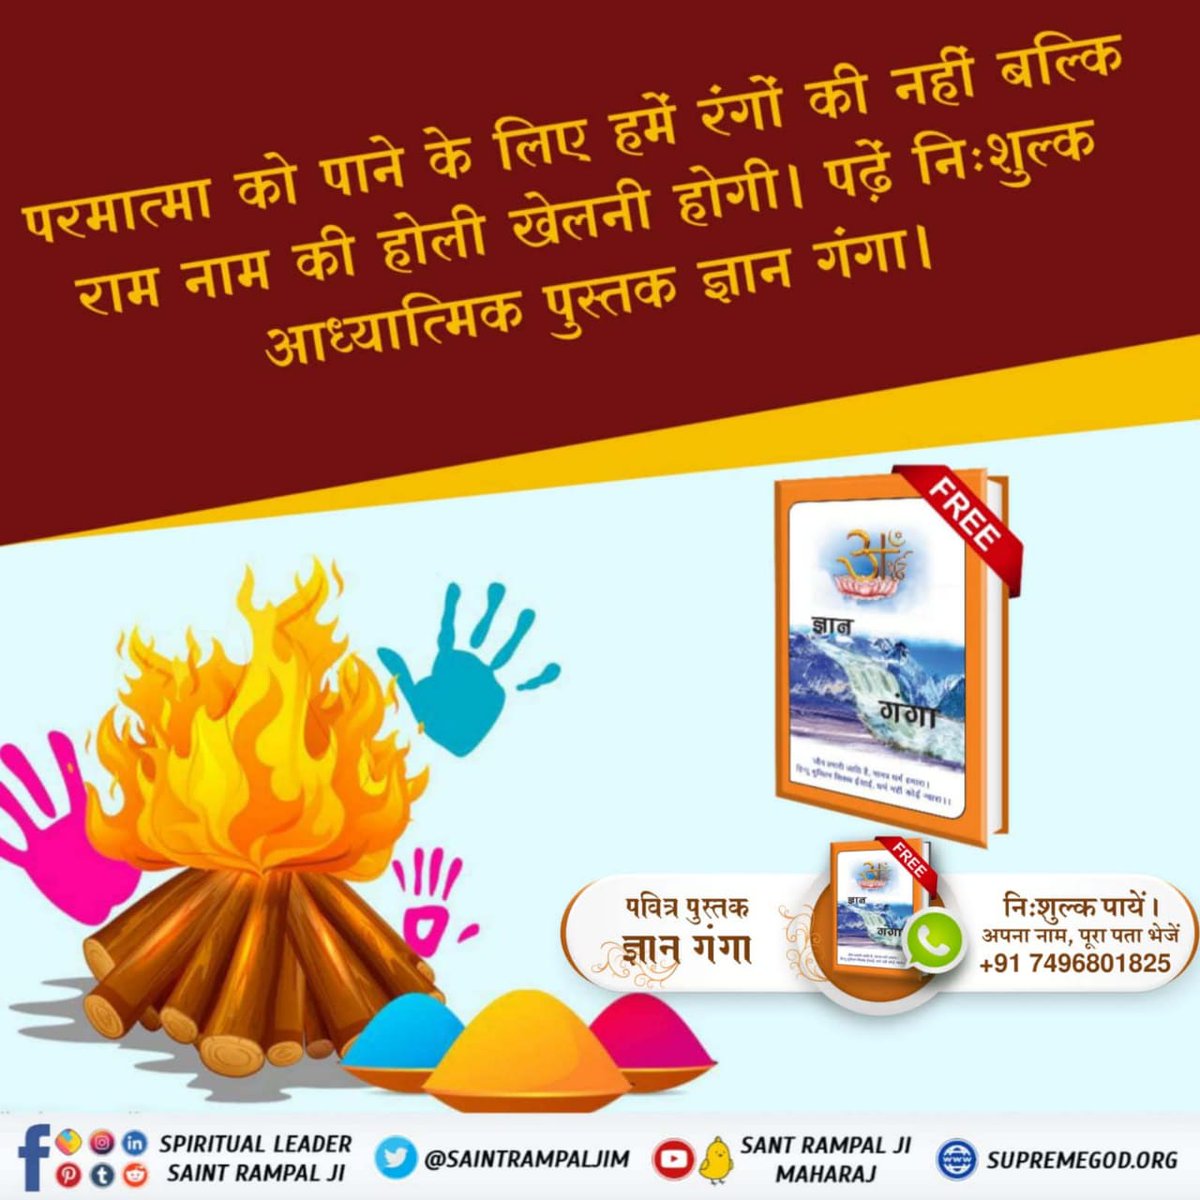 #GodNightSunday 

Bring home the most precious spiritual book this Holi 'Gyan Ganga'

Order your free copy today.
To know more please visit Our YouTube Channel 'Sant Rampal Ji Maharaj'
#सतभक्ति_की_होली
Must Watch
Sadhna Tv 📺 7:30 PM to 8:30 PM